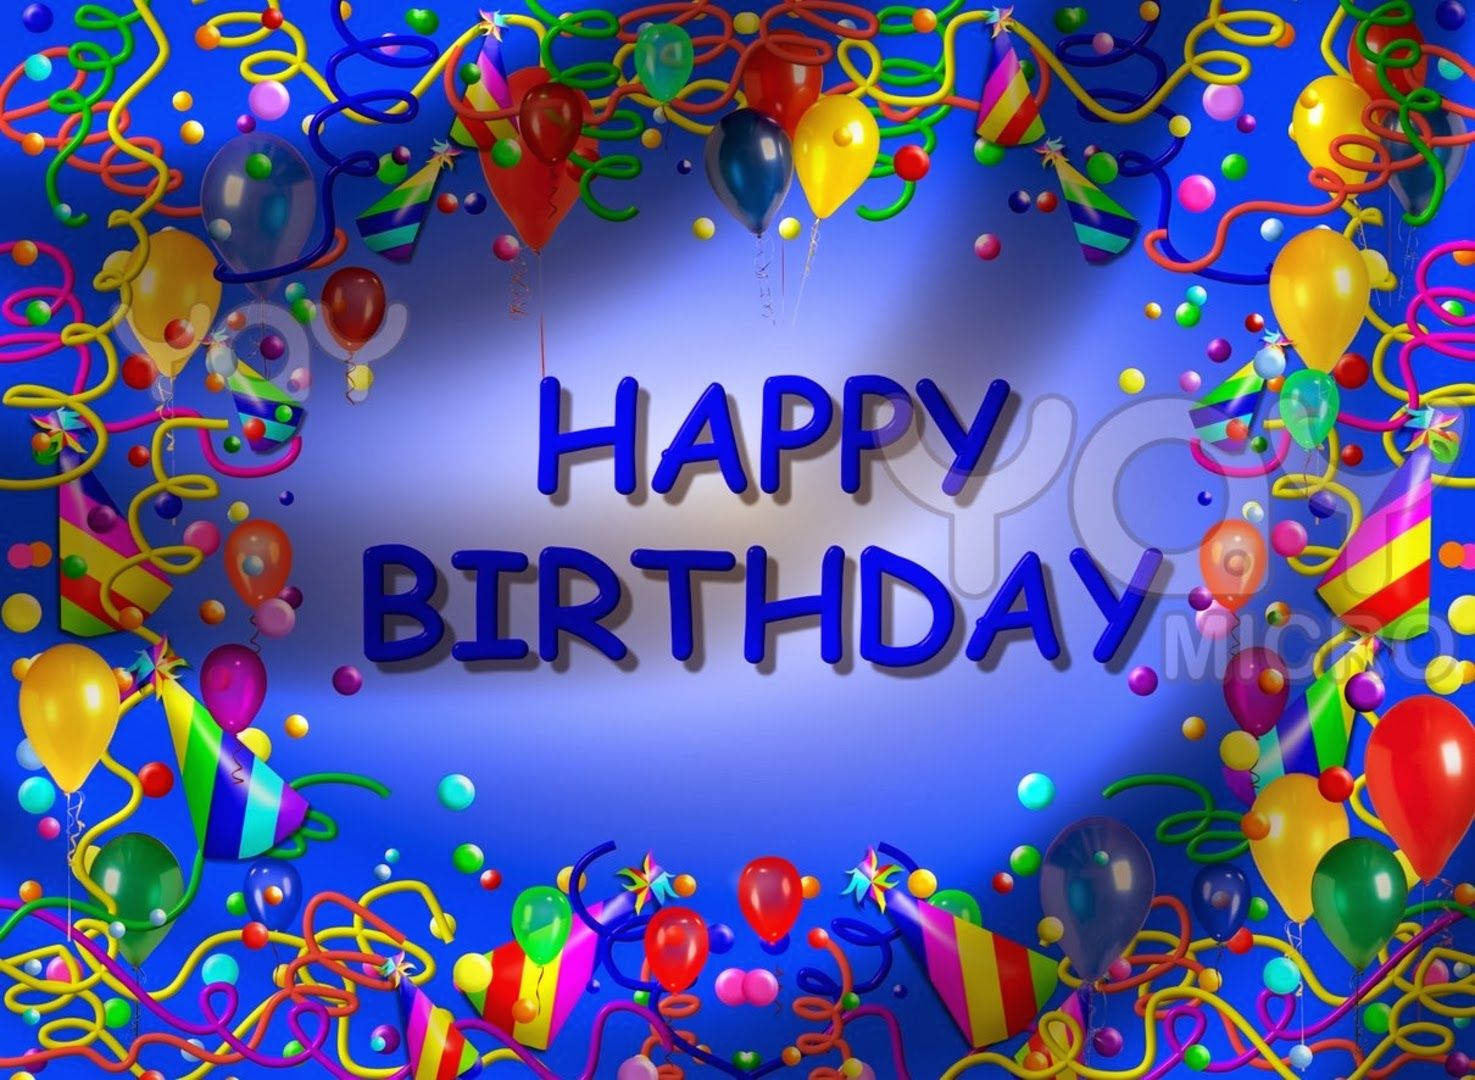 Celebrate someone special with a Happy Birthday greeting! Wallpaper